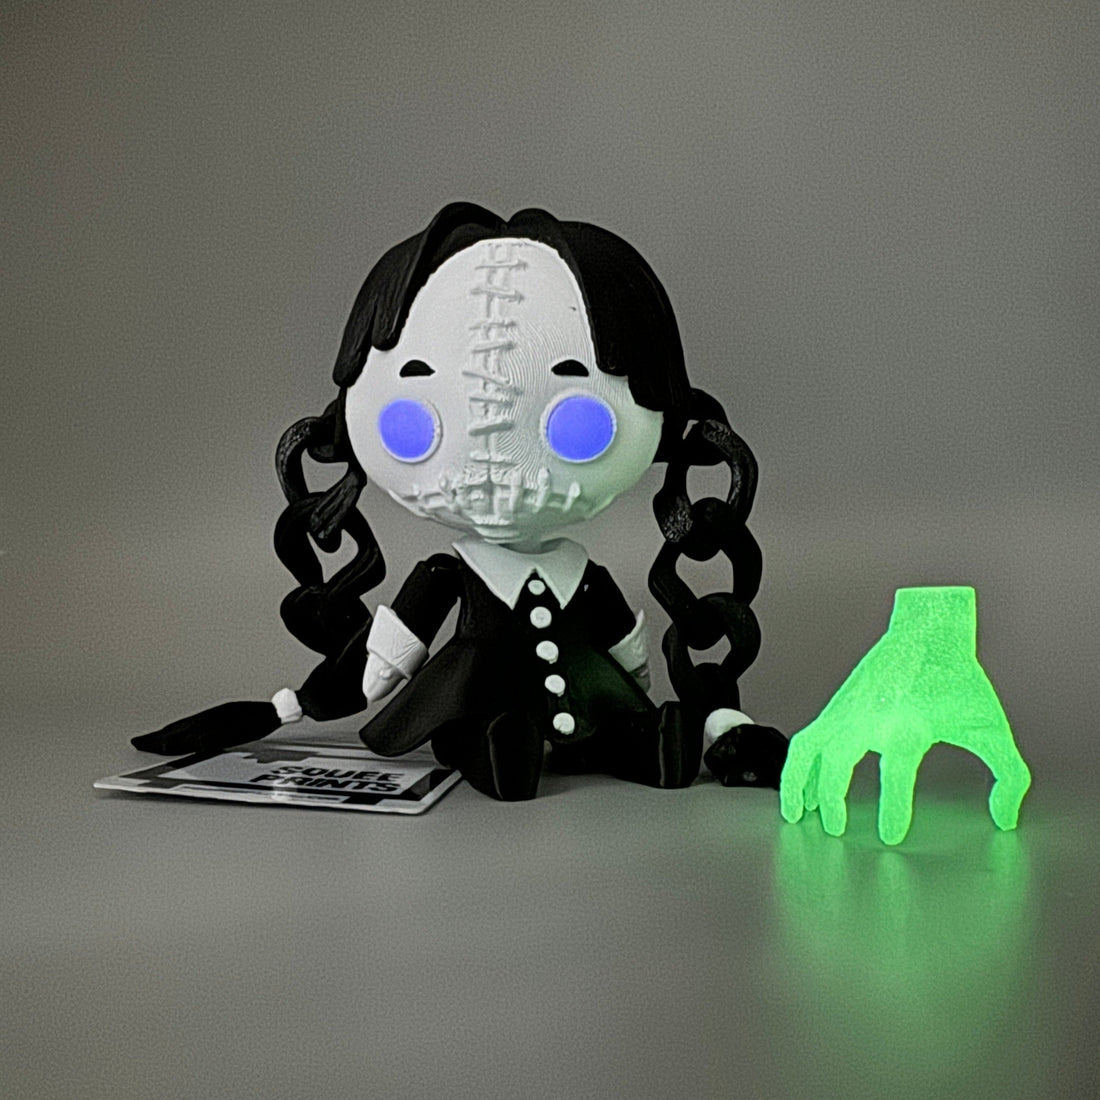 Creepy Wednesday Addams Doll - Squee Prints